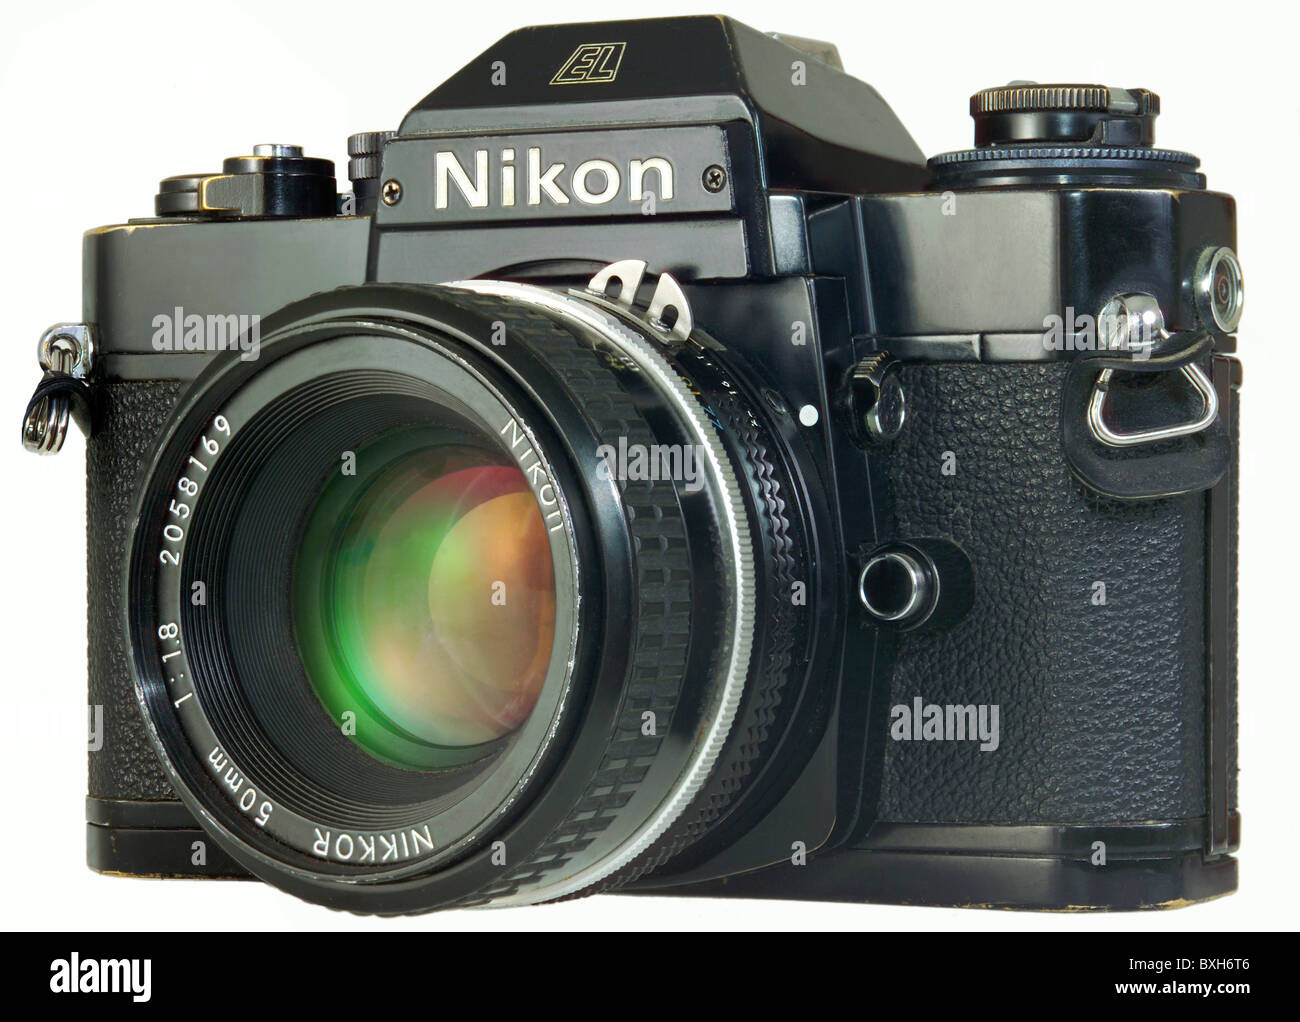 photography, camera, Nikon EL2, Japan, 1977, 1970s, 70s, 20th century, historic, historical, Japanese, Made in Japan, electronic shutter, technics, technology, analouge, cameras, Nikkor lens 1:1.8 50mm, body with lens, clipping, cut out, cut-out, cut-outs, Additional-Rights-Clearences-Not Available Stock Photo